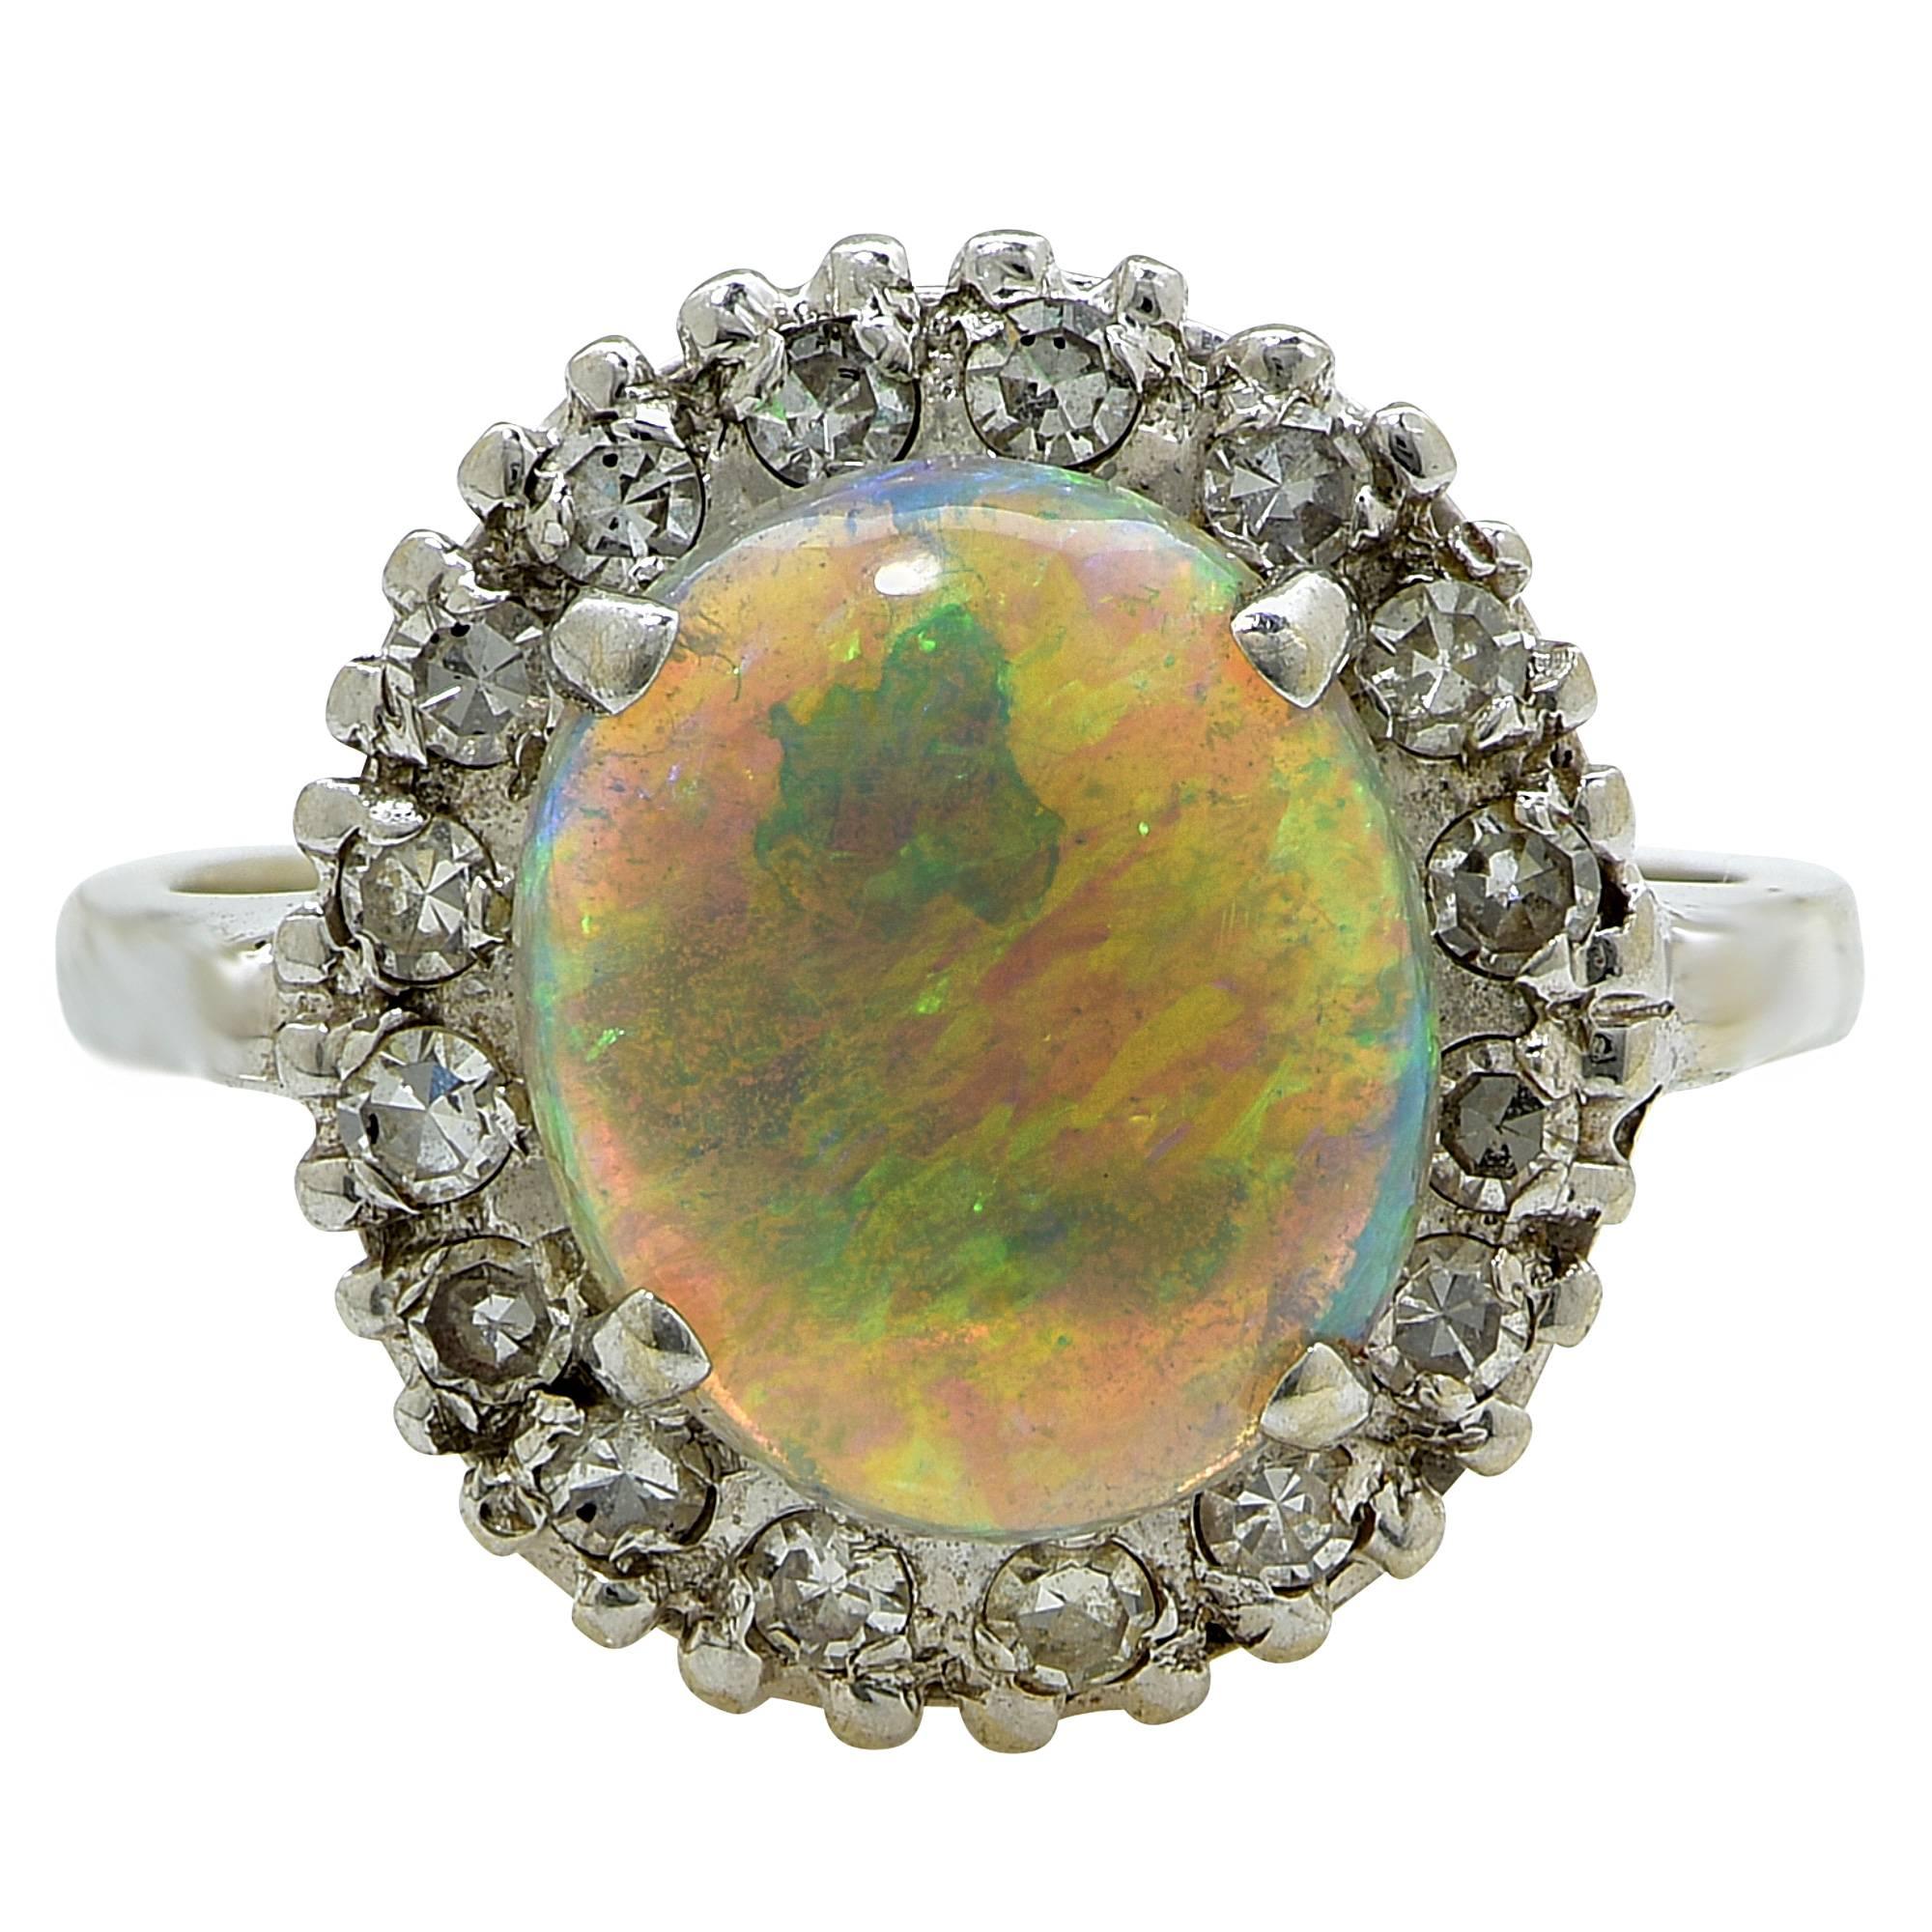 White gold ring containing a cabochon opal measuring 10.92mm by 9.24mm by 3.89mm surrounded by 16 single cut diamonds weighing approximately .25cts.

The ring is a size 5 and can be sized up or down.
It is stamped and tested as 14k gold.
The